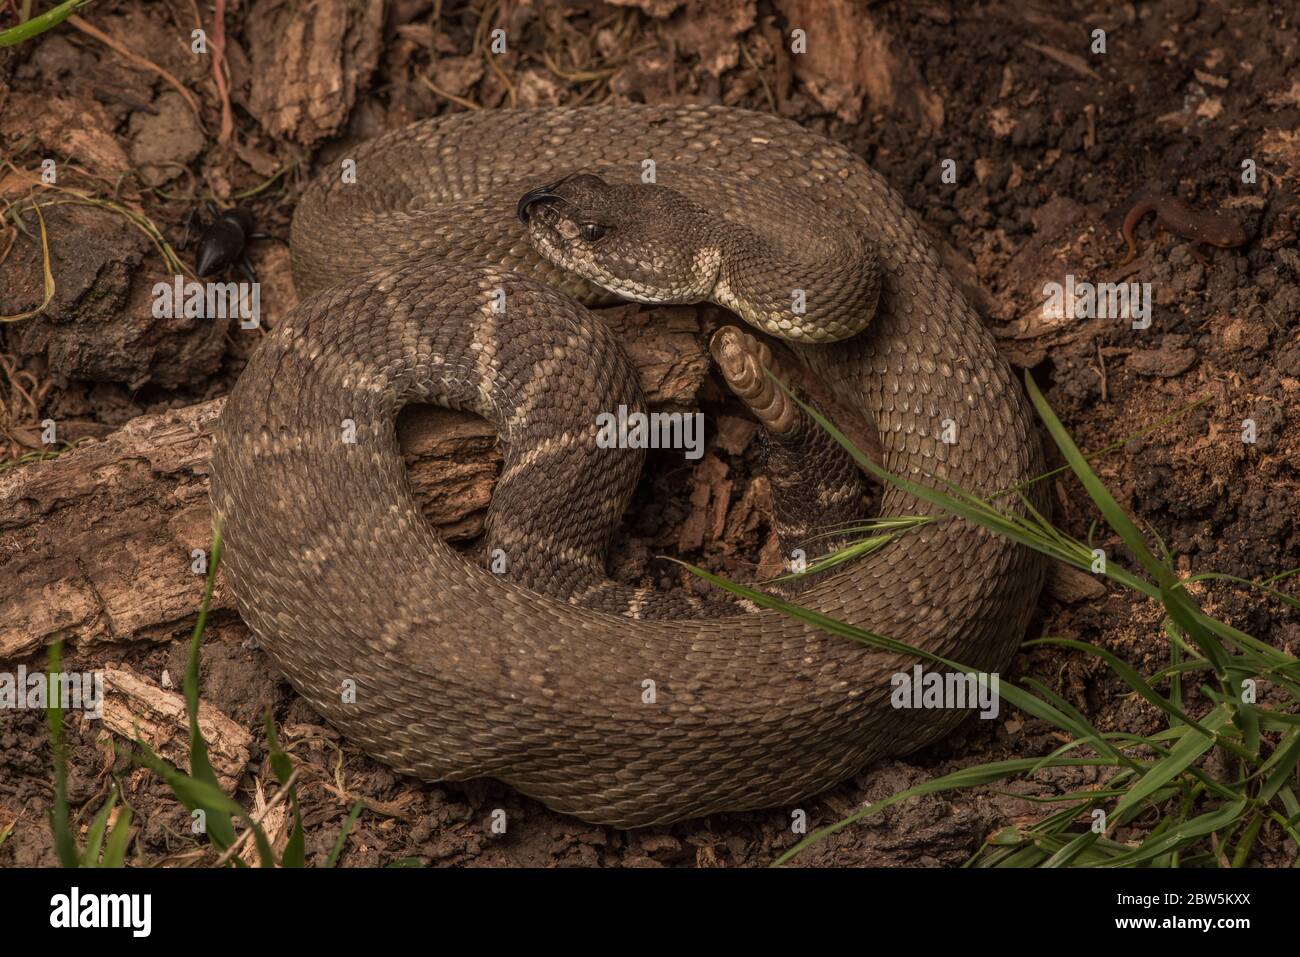 A northern pacific rattlesnake (Crotalus oreganus), the only dangerously venomous snake species in Northern California. Stock Photo